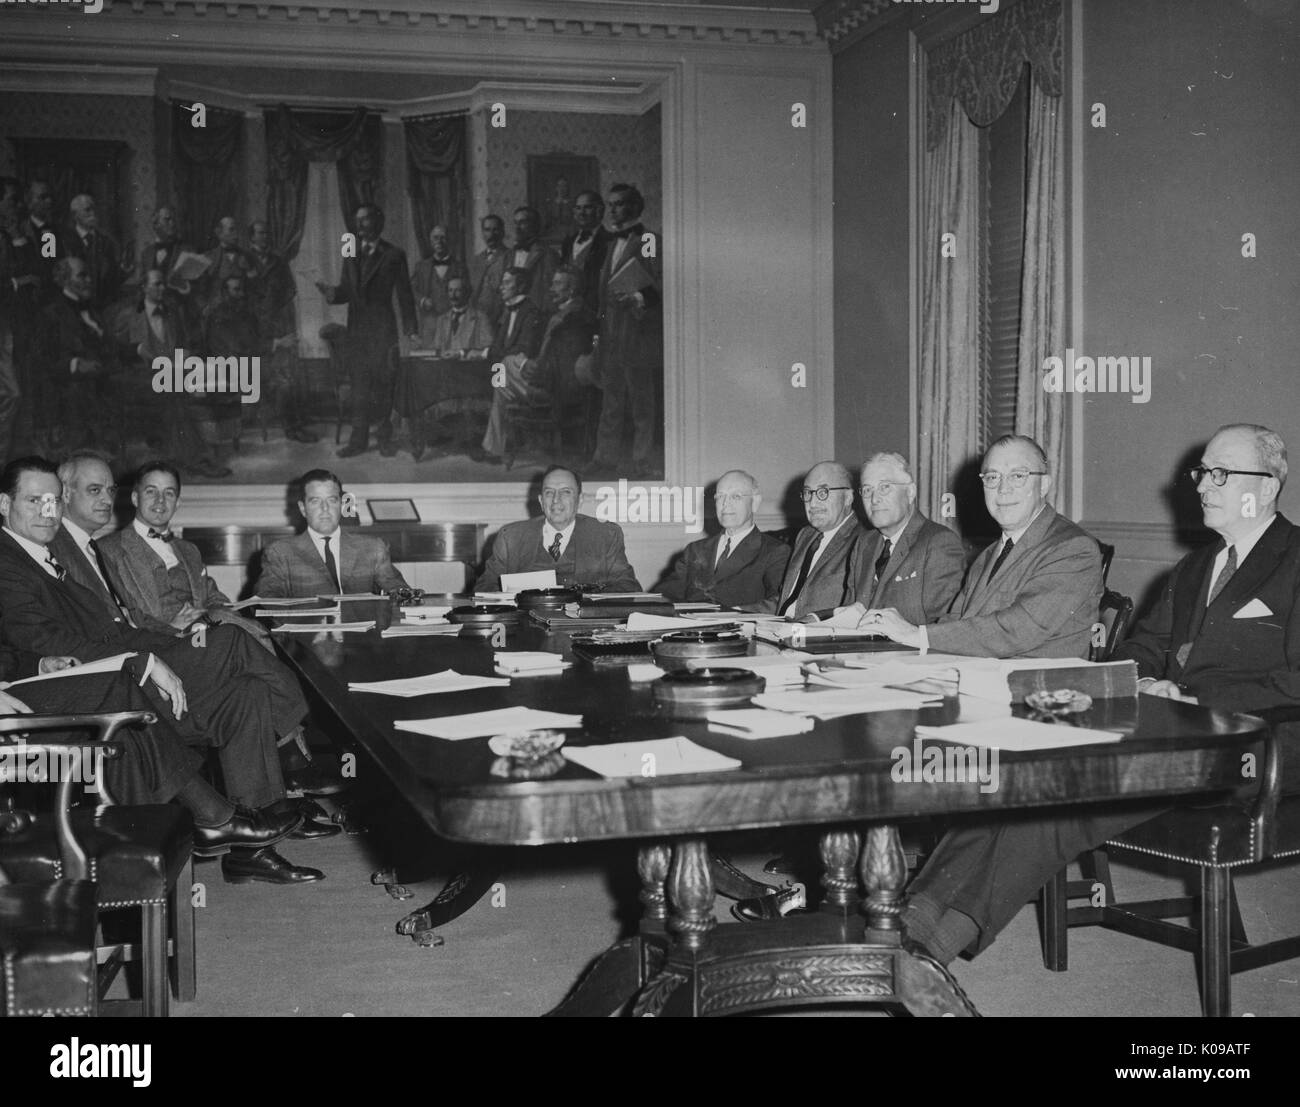 Landscape shot of ten men sitting around a wooden table, upon which papers are scattered; the Executive Board of Trustees with Milton S Eisenhower, December 14, 1959. Stock Photo